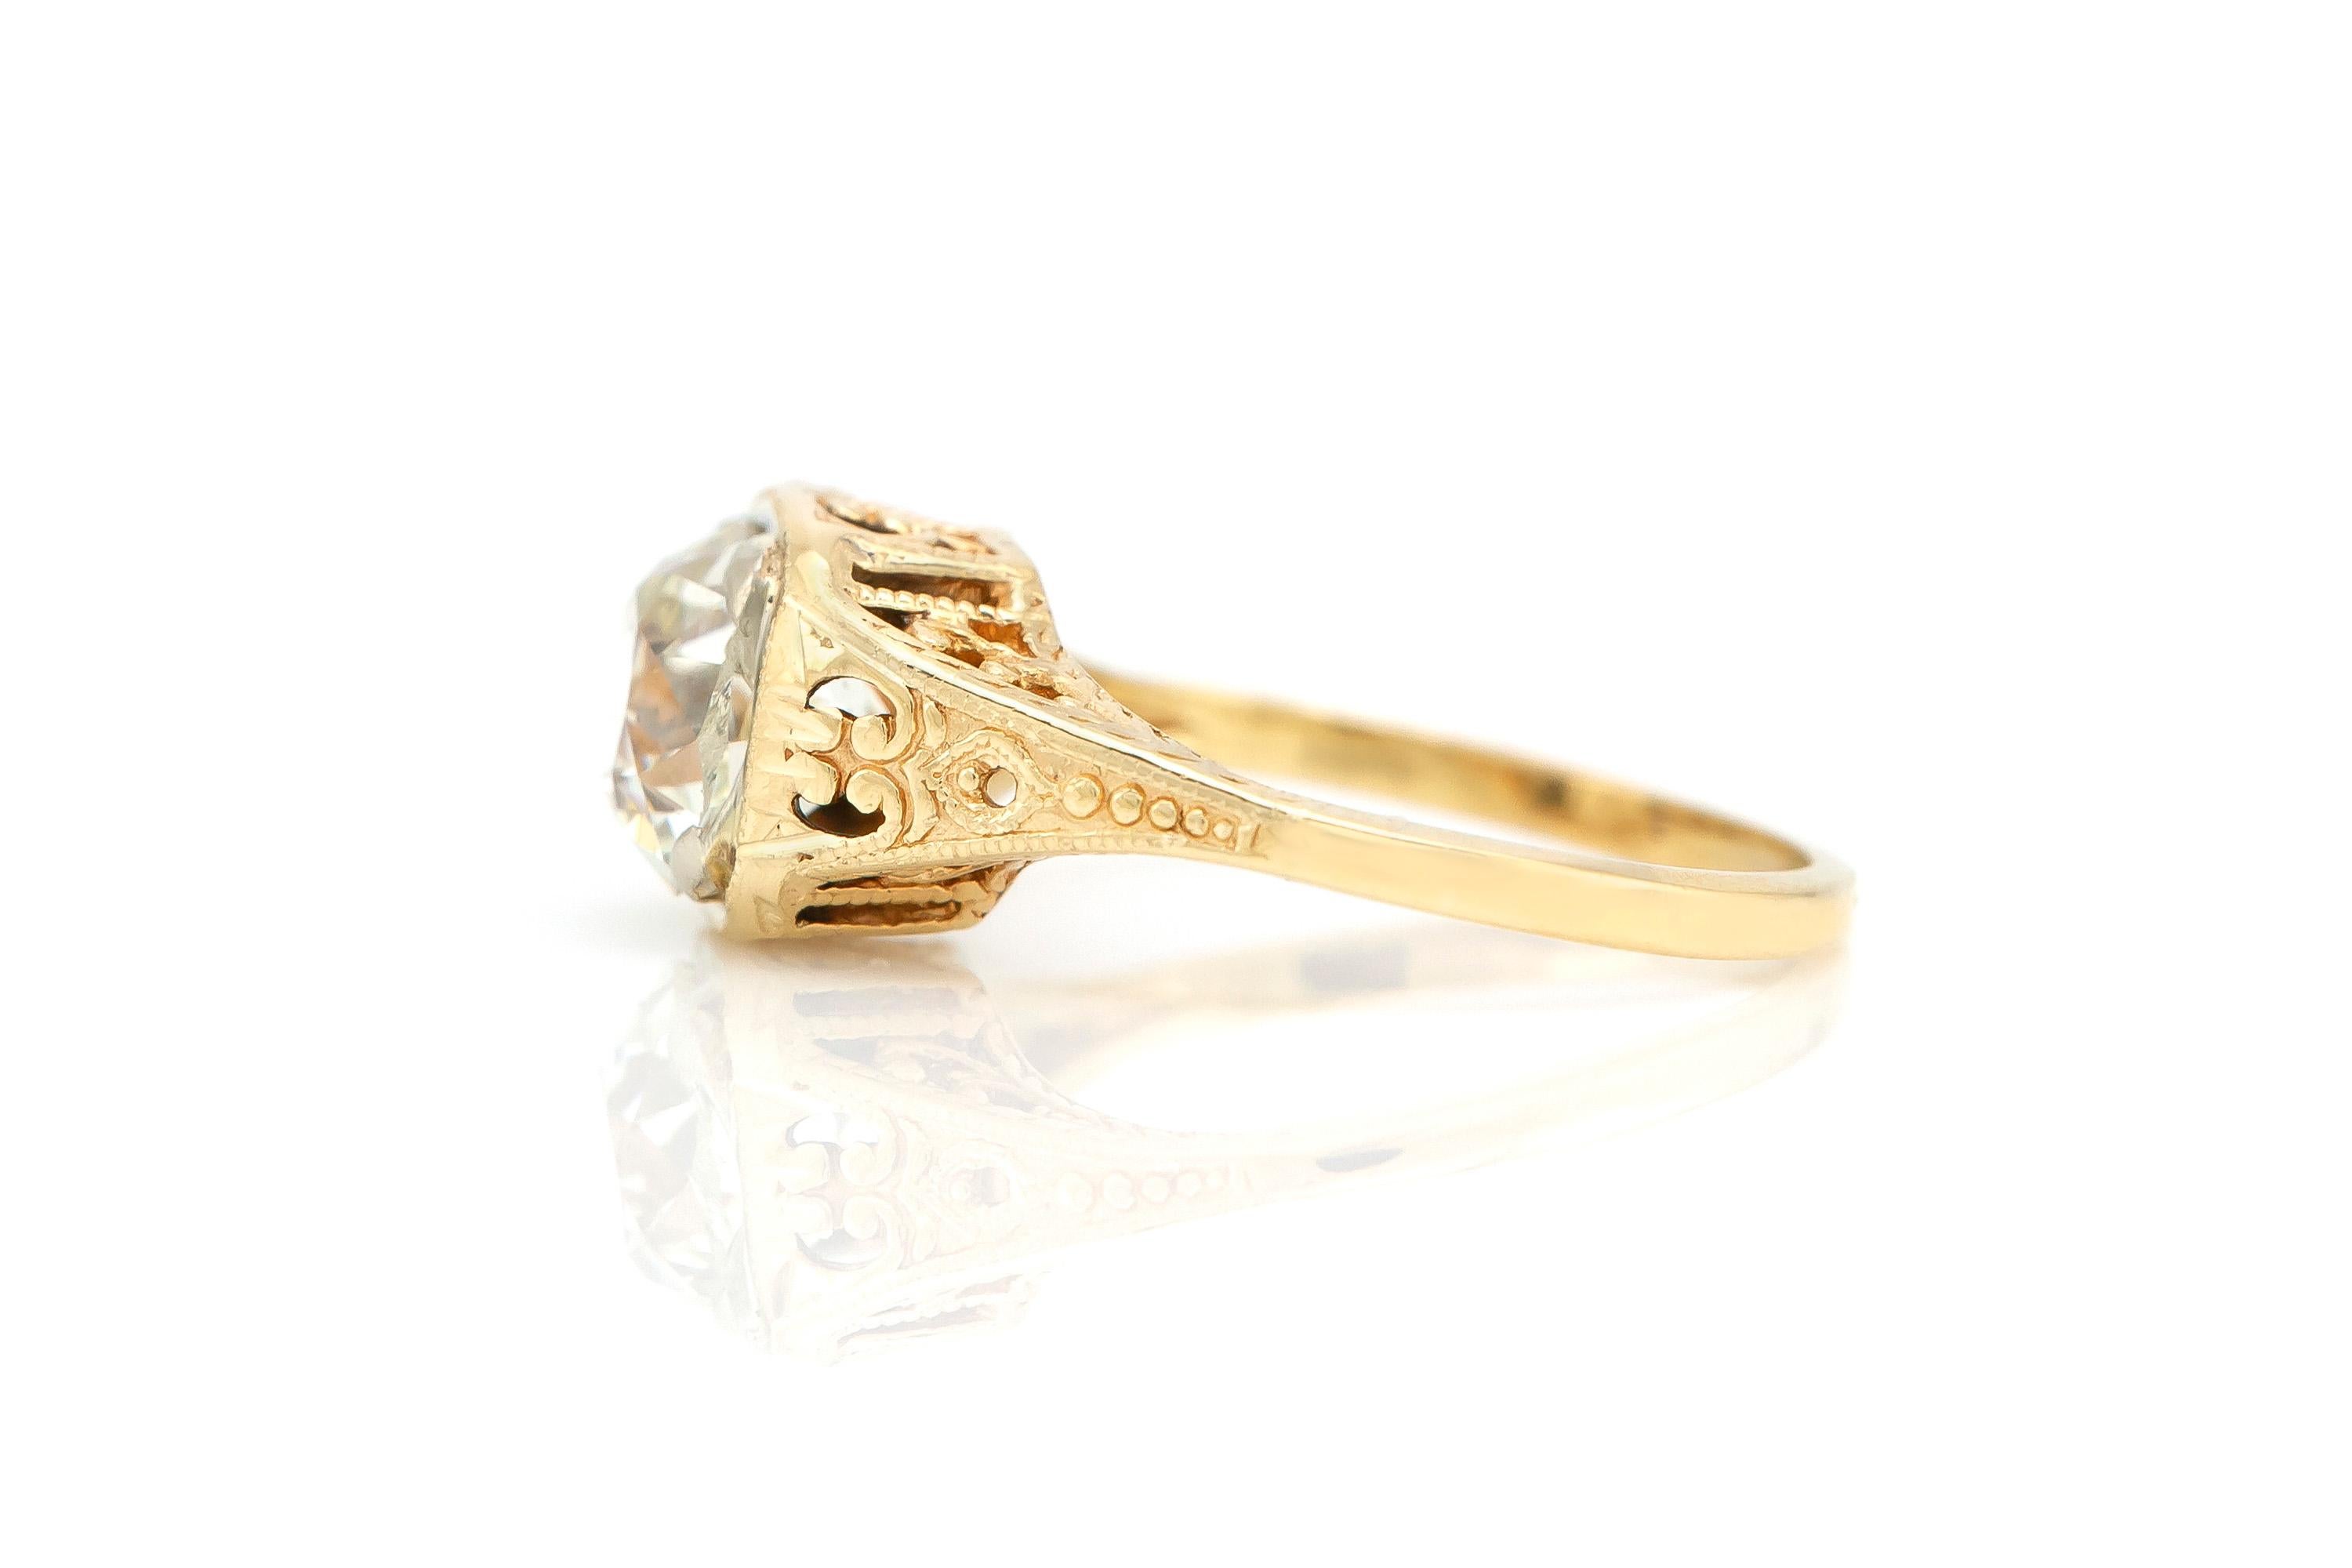 Finely crafted in 14k yellow gold with filligree and a center Old Mine Cushion cut diamond weighing 1.56 carats.
J-K Color, VS2 Clarity
Art Deco, circa 1930s